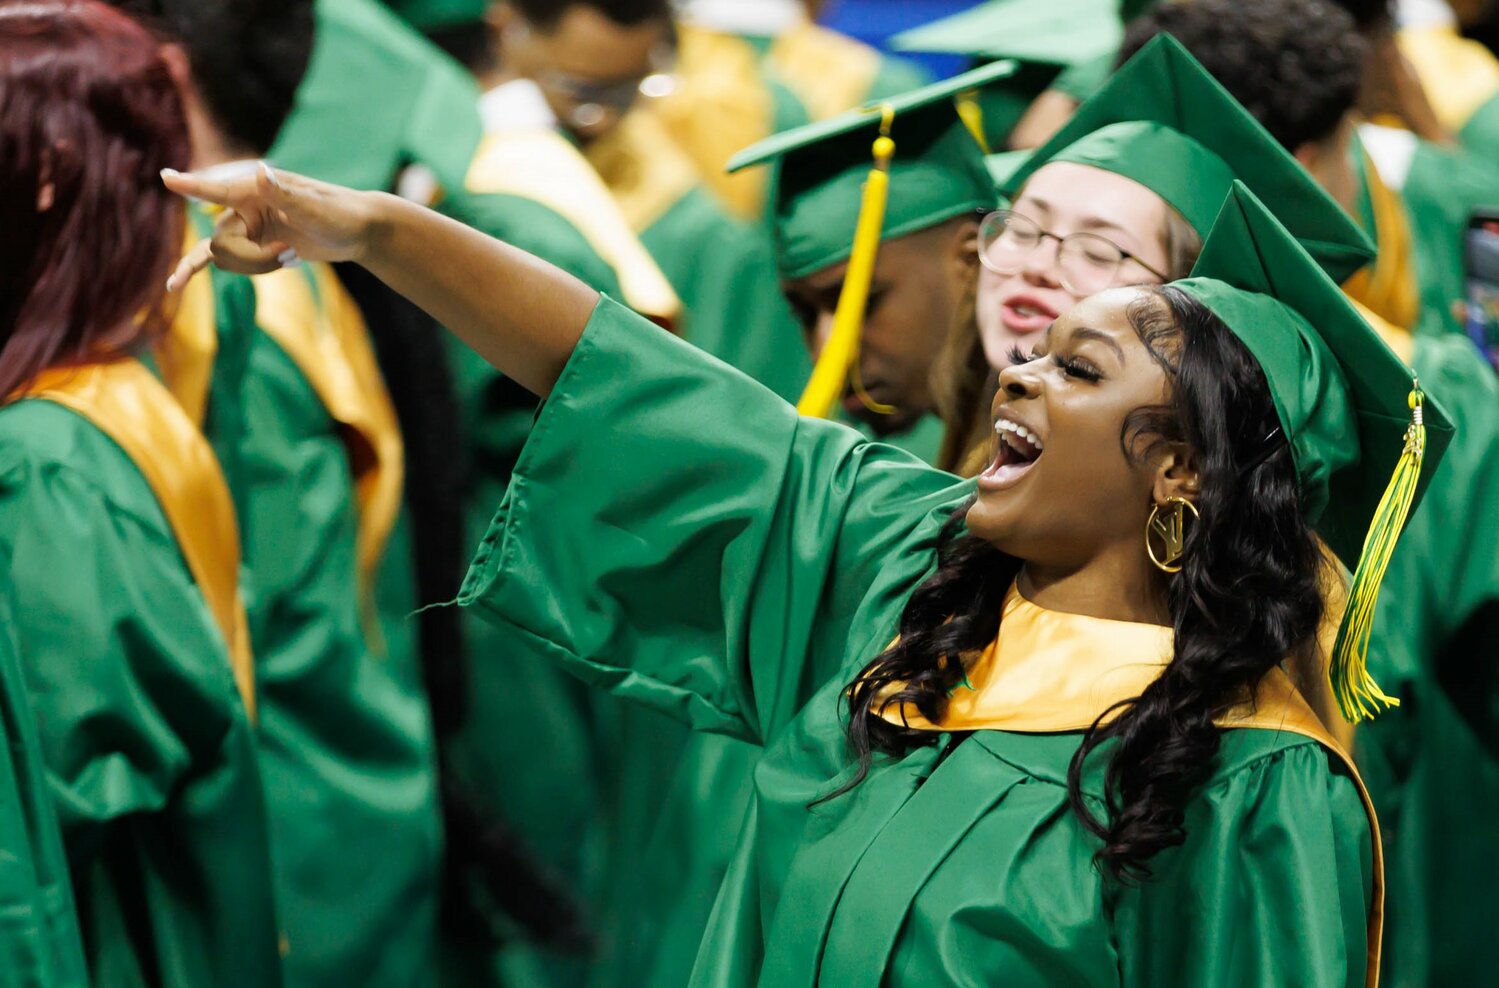 A Pine Forest High School graduate celebrates at commencement Monday in the Crown Coliseum.